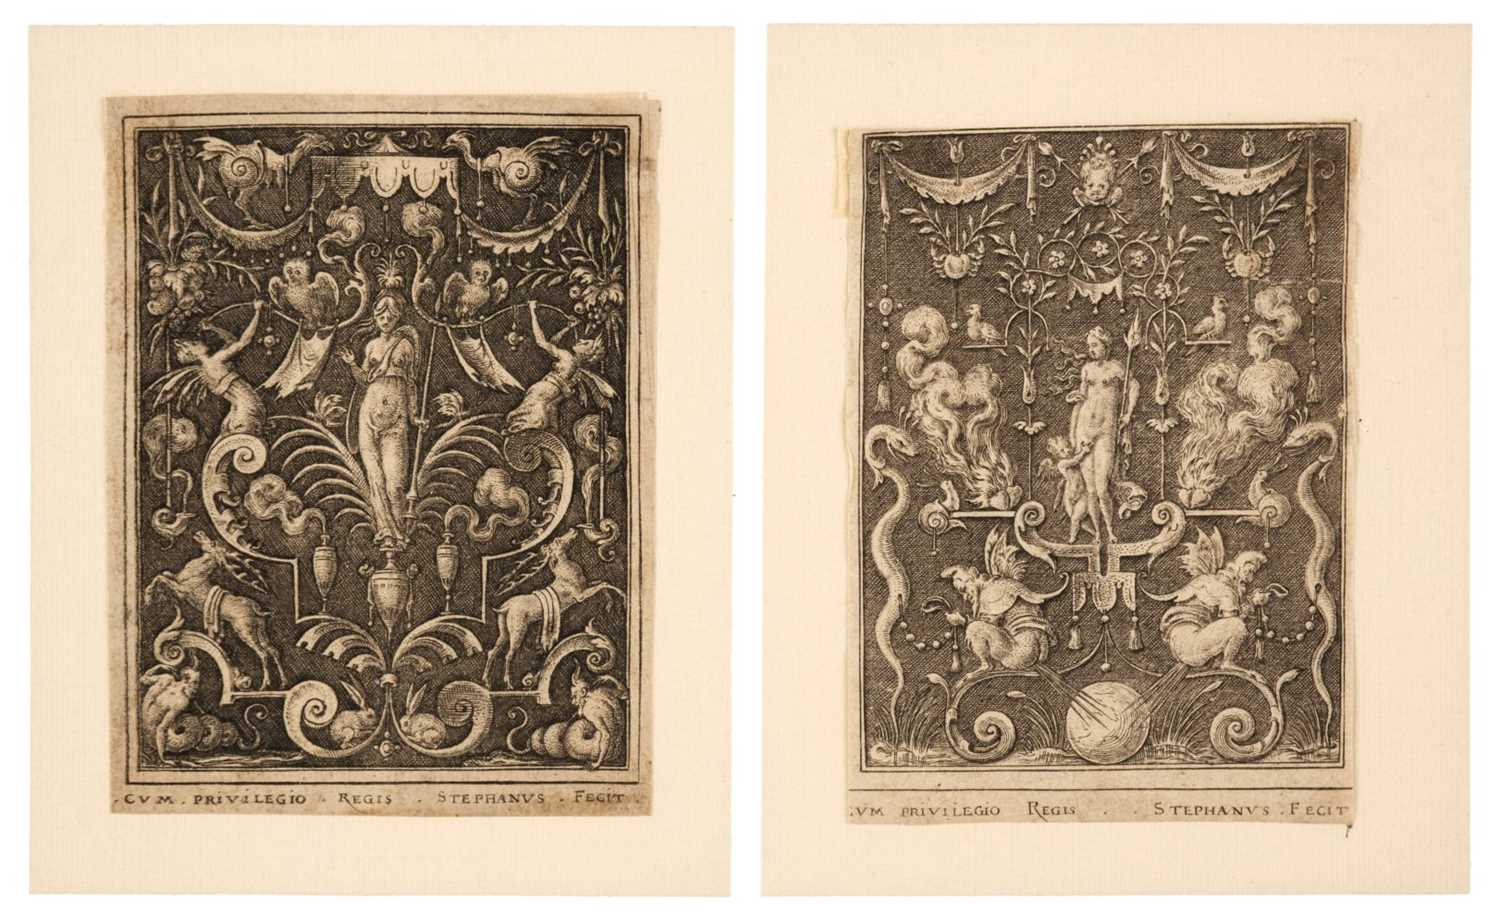 Lot 46 - Delaune (Étienne, 1518-1595). Two Grotesques: Venus and Cupid, and Minerva, engravings, circa 1565